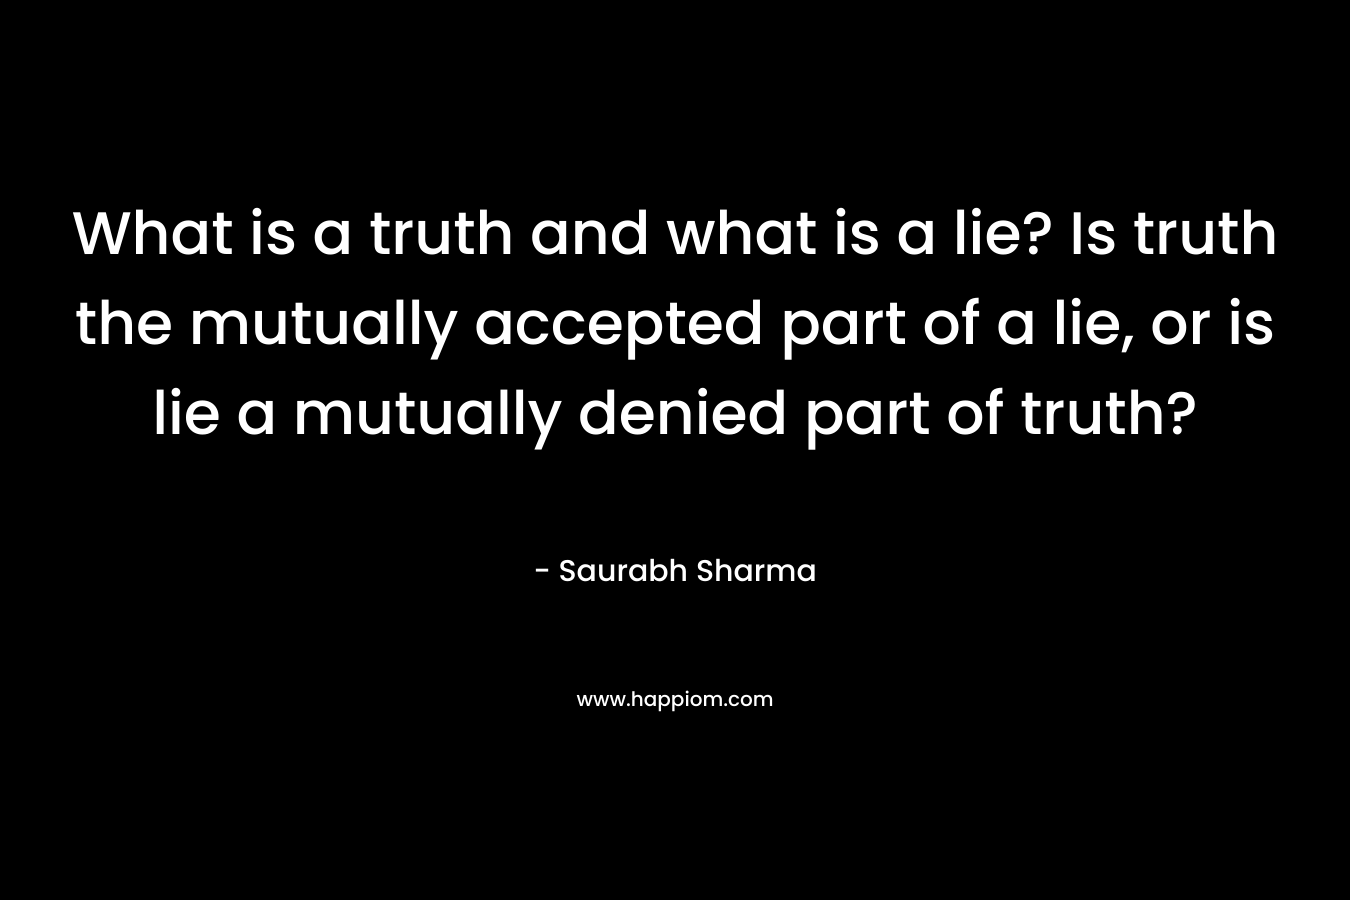 What is a truth and what is a lie? Is truth the mutually accepted part of a lie, or is lie a mutually denied part of truth?